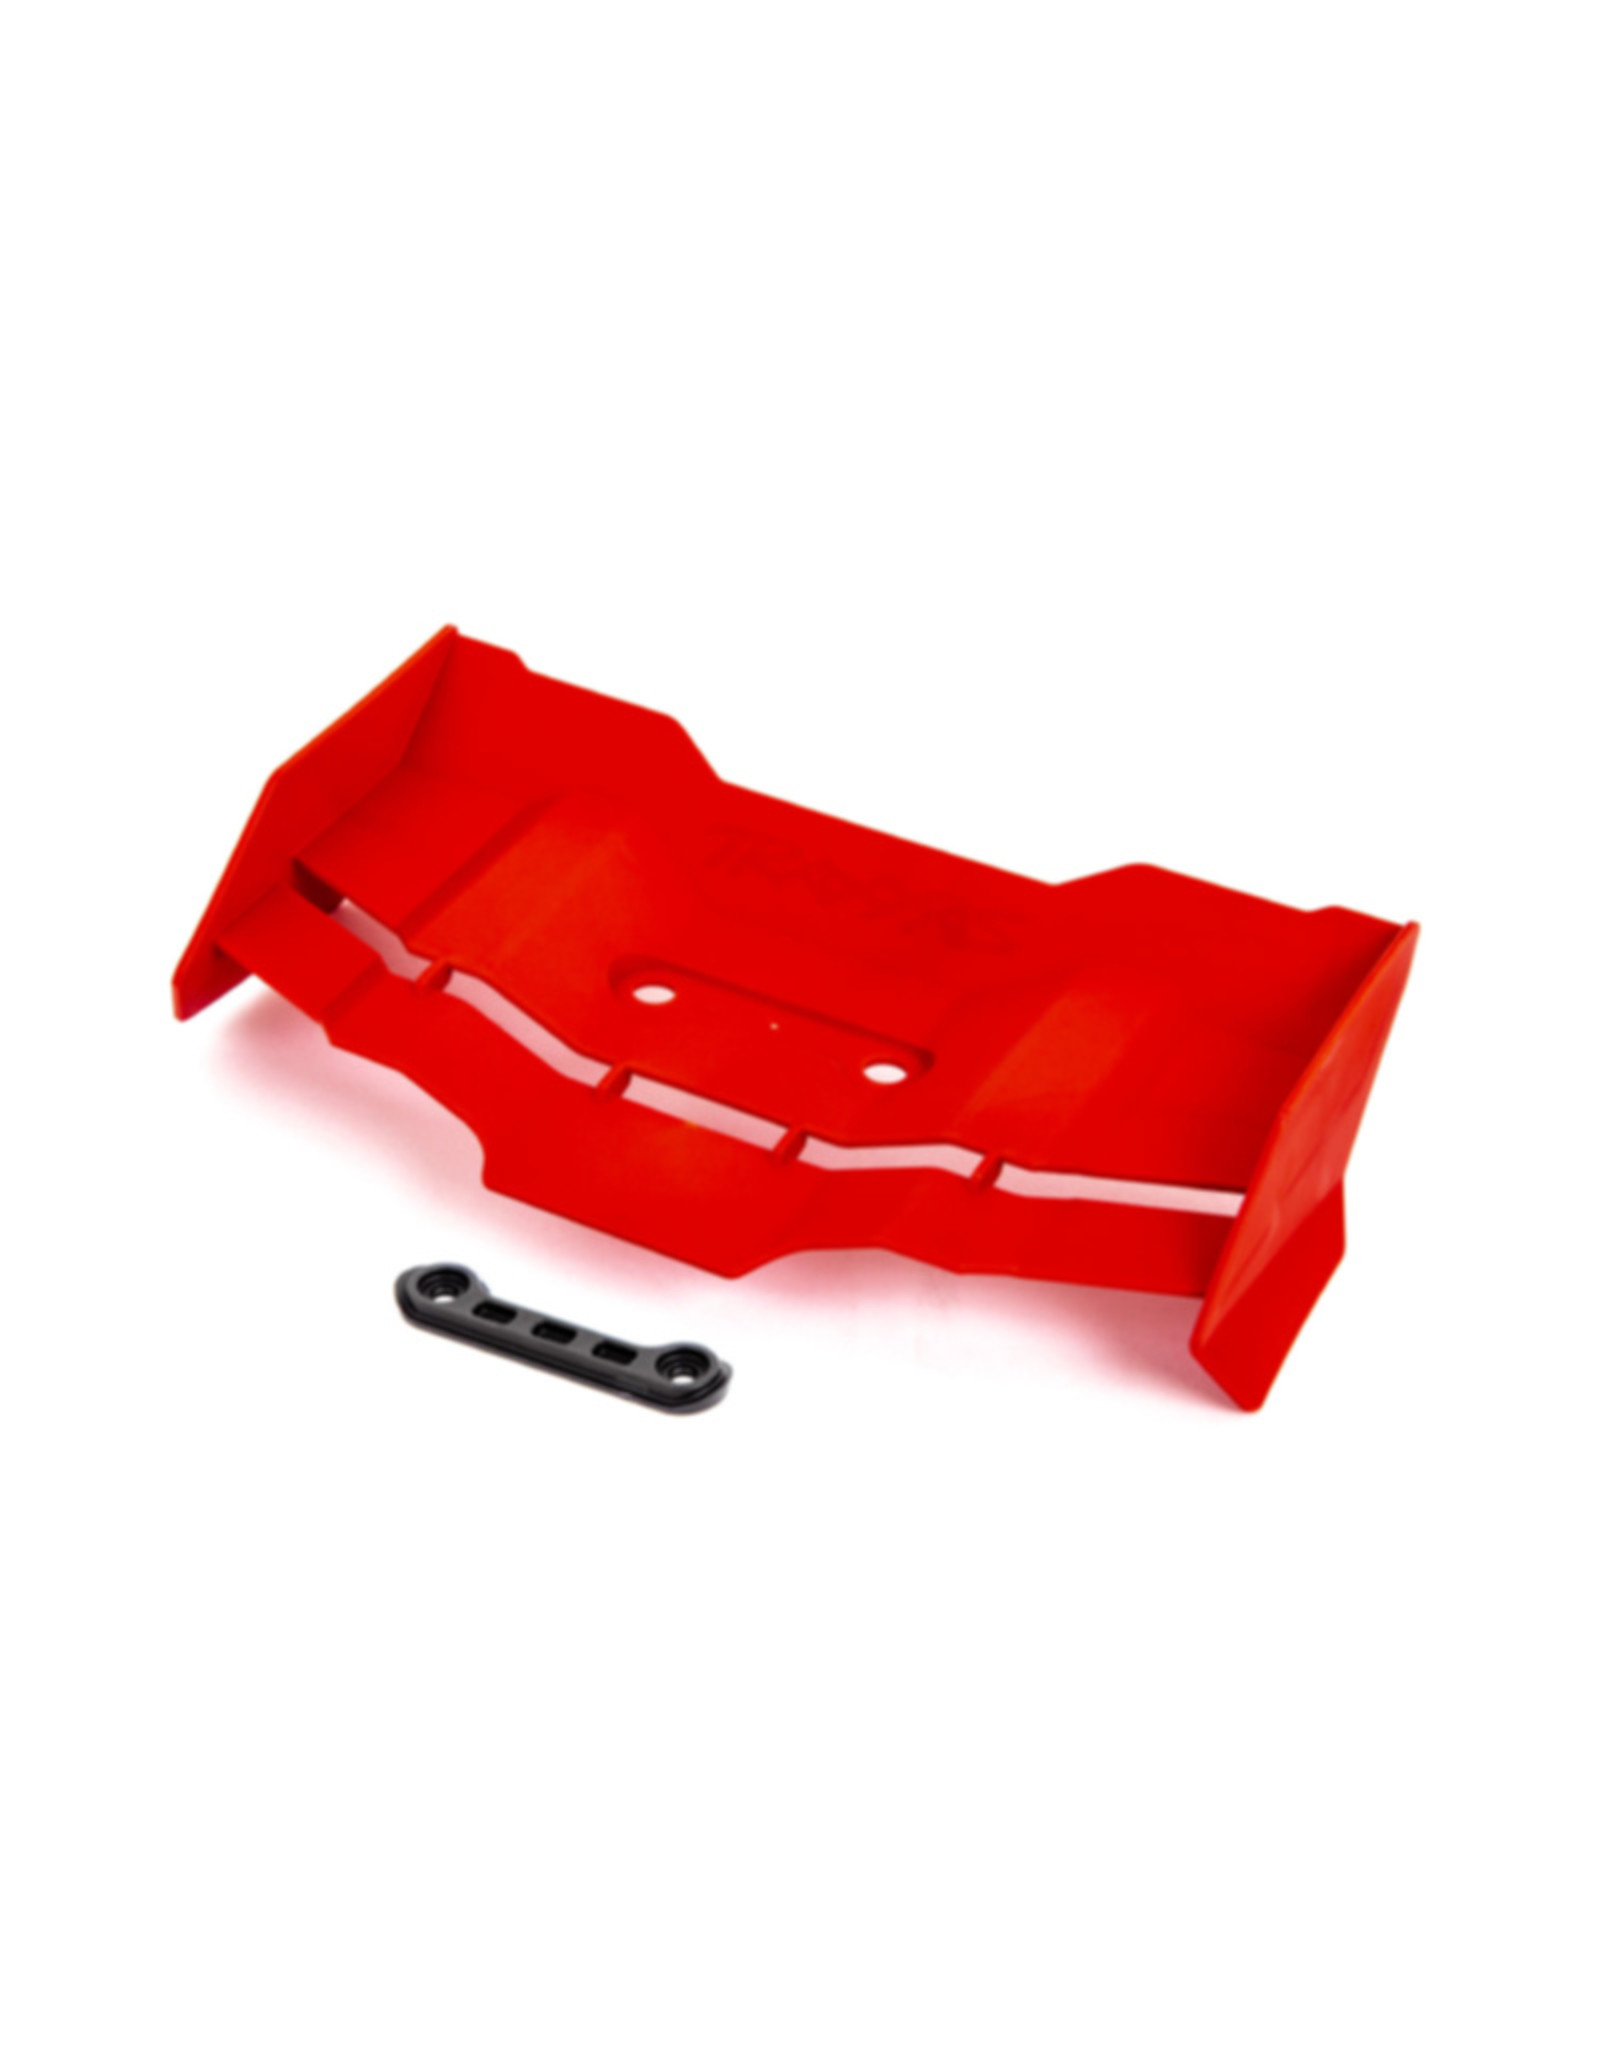 Traxxas TRA9517R WING/WING WASHER RED SLEDGE